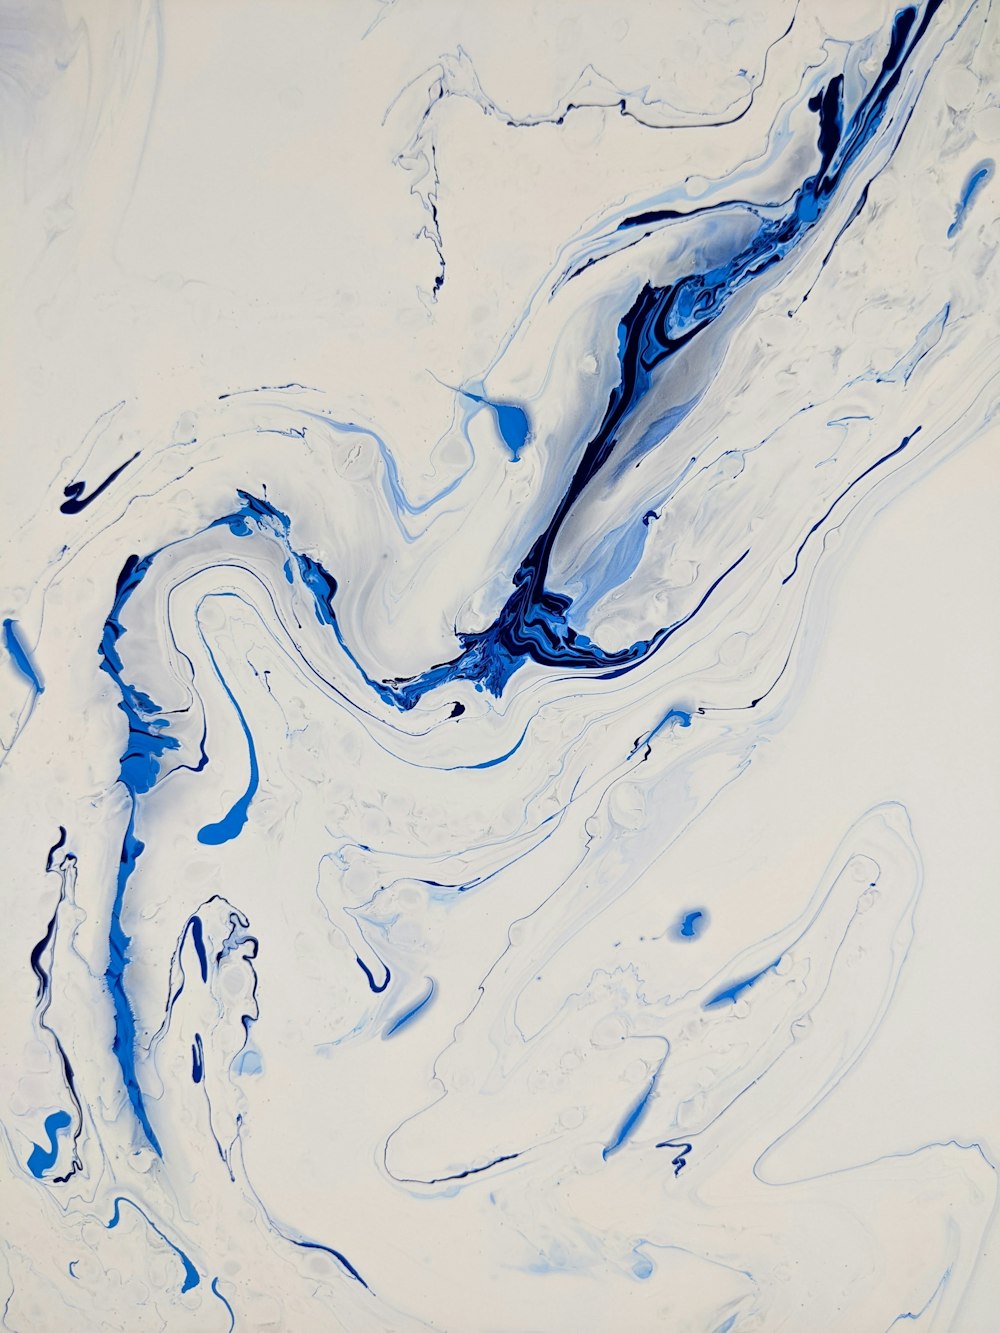 a painting of blue and white swirls on a white background